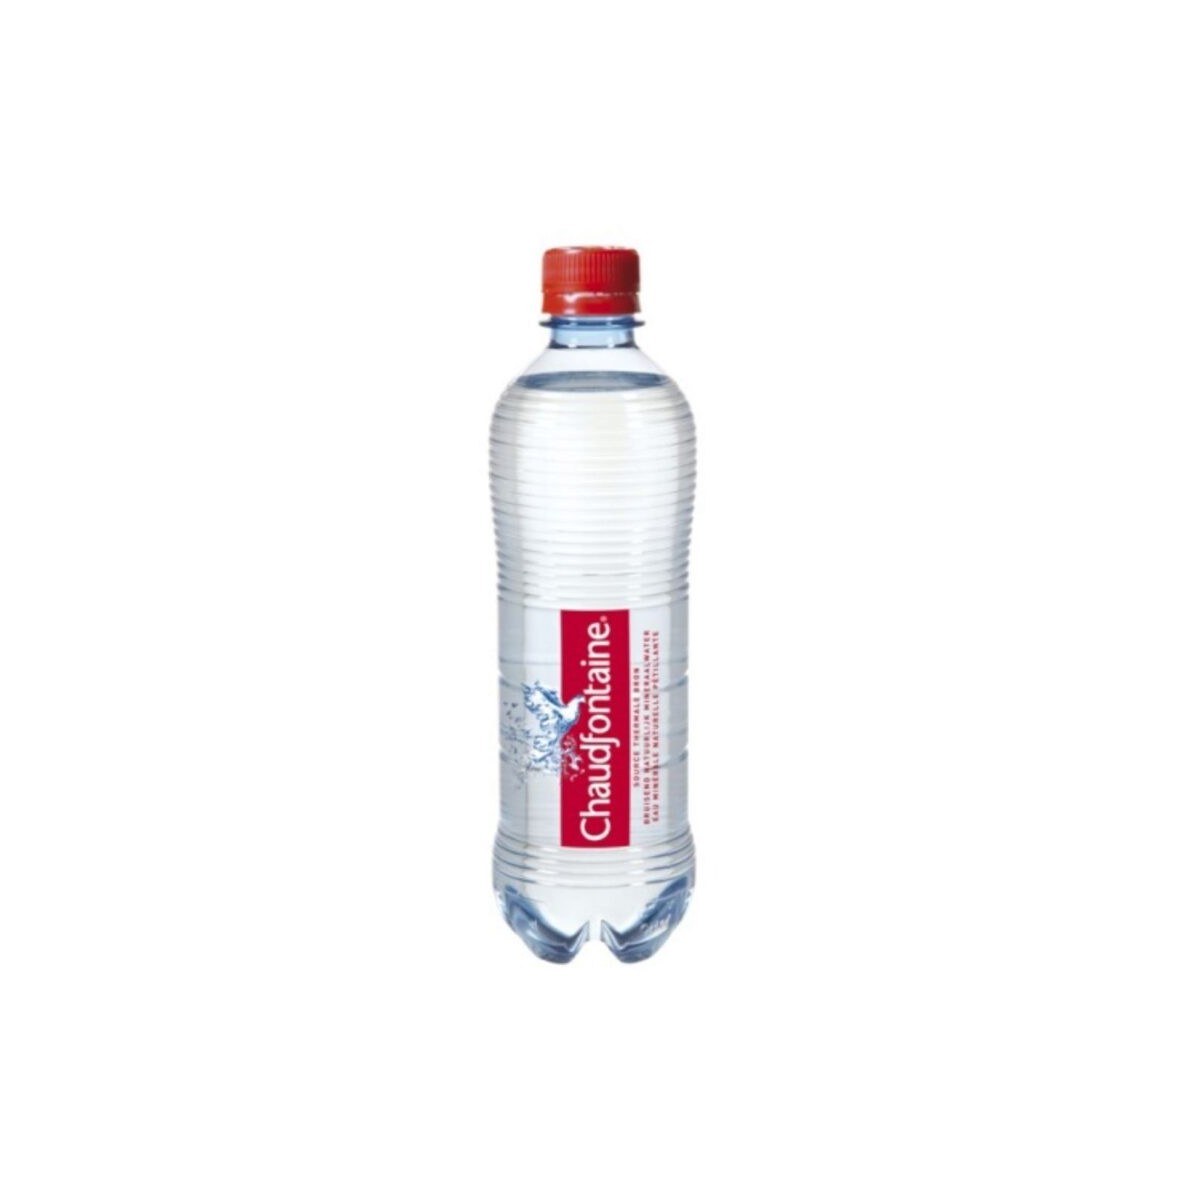 CHAUDFONTAINE SPARKLING WATER 24X50CL BOTTLE  TRAY